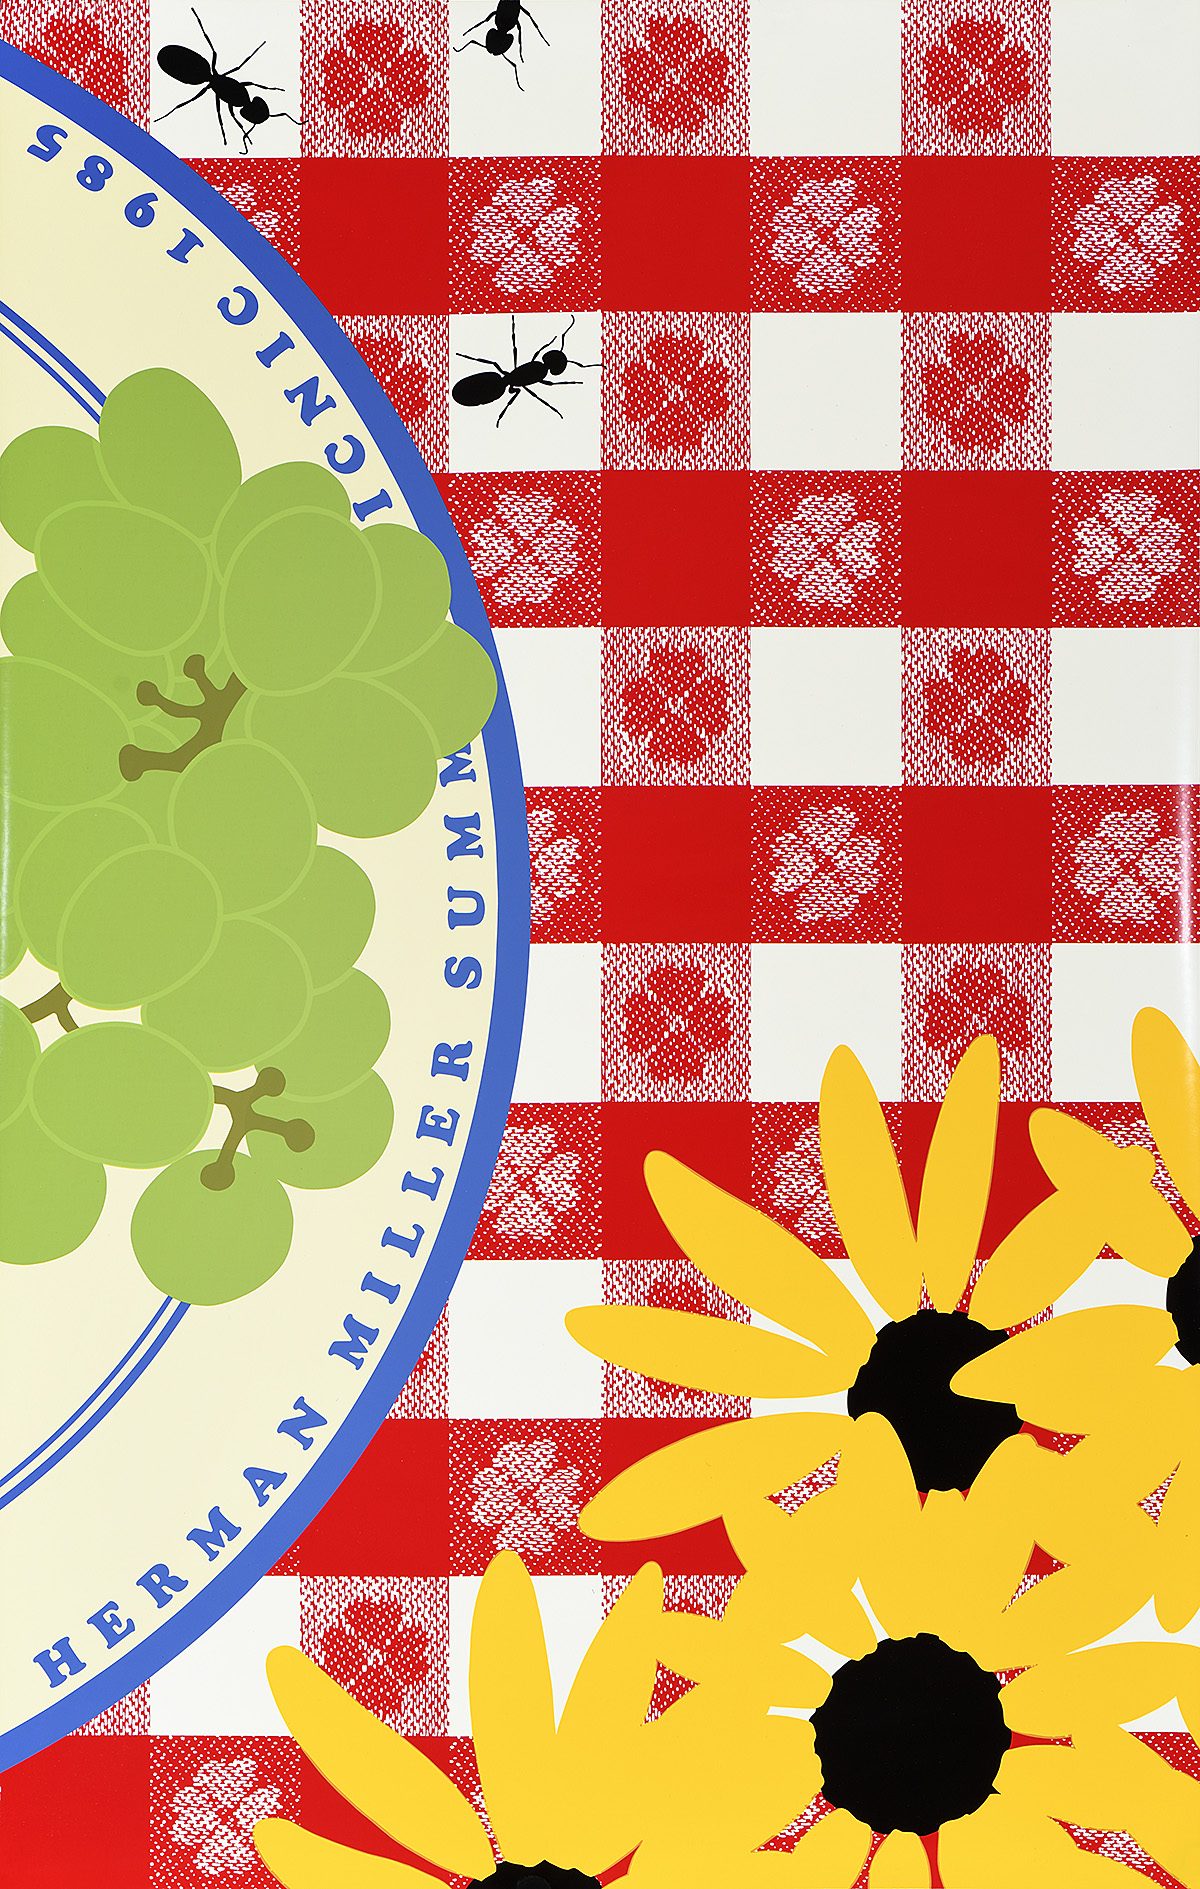 illustrational poster of a plate of grapes, bunch of sunflowers, and crawling ants on top a table with a plaid tablecloth